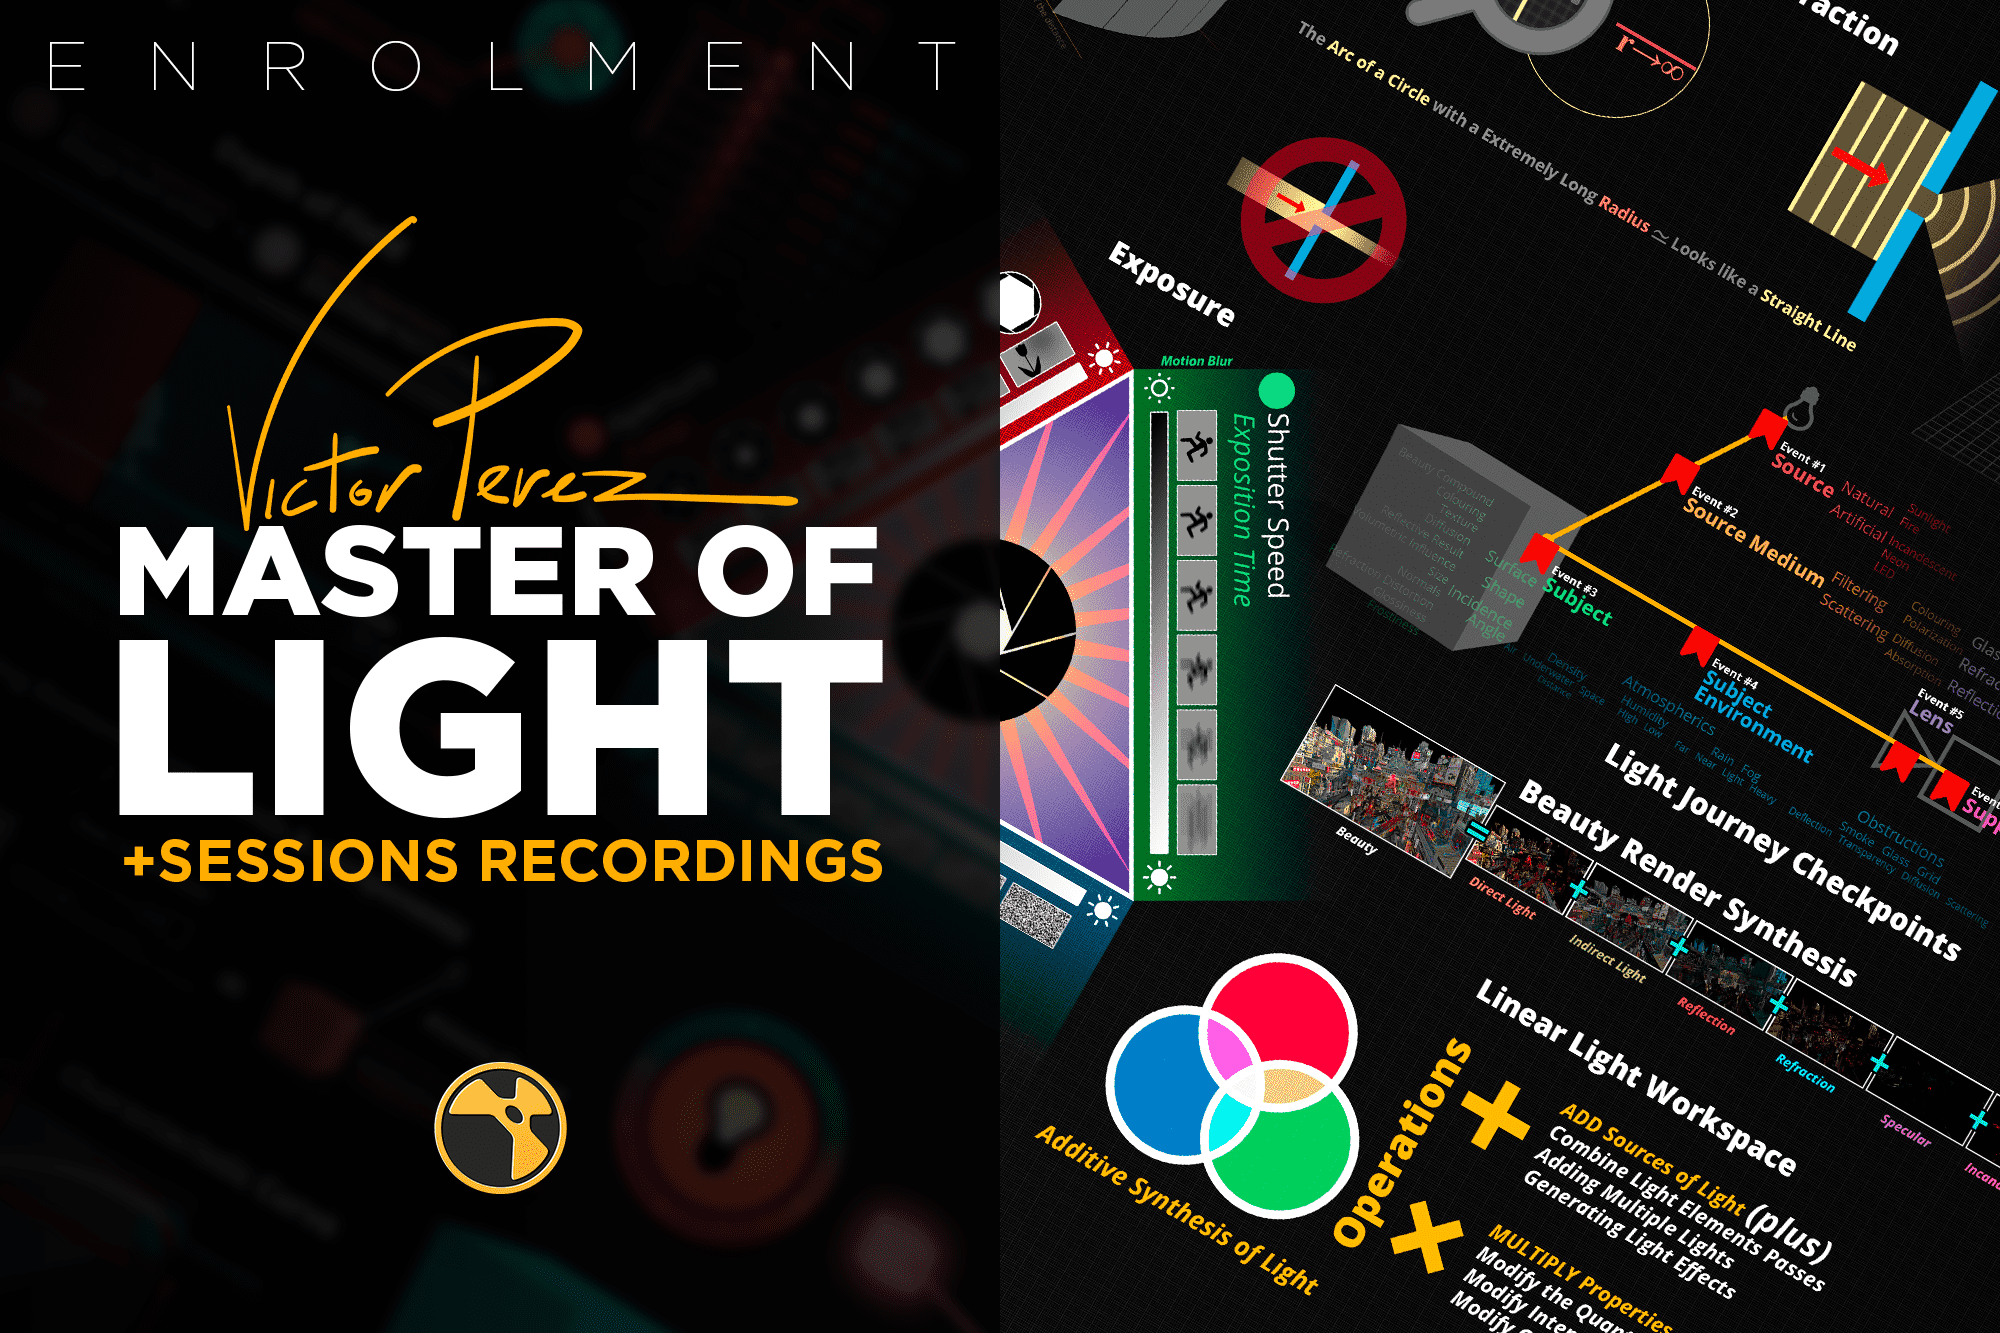 Video Tutorials: Master of Light - Recordings of the Live Sessions